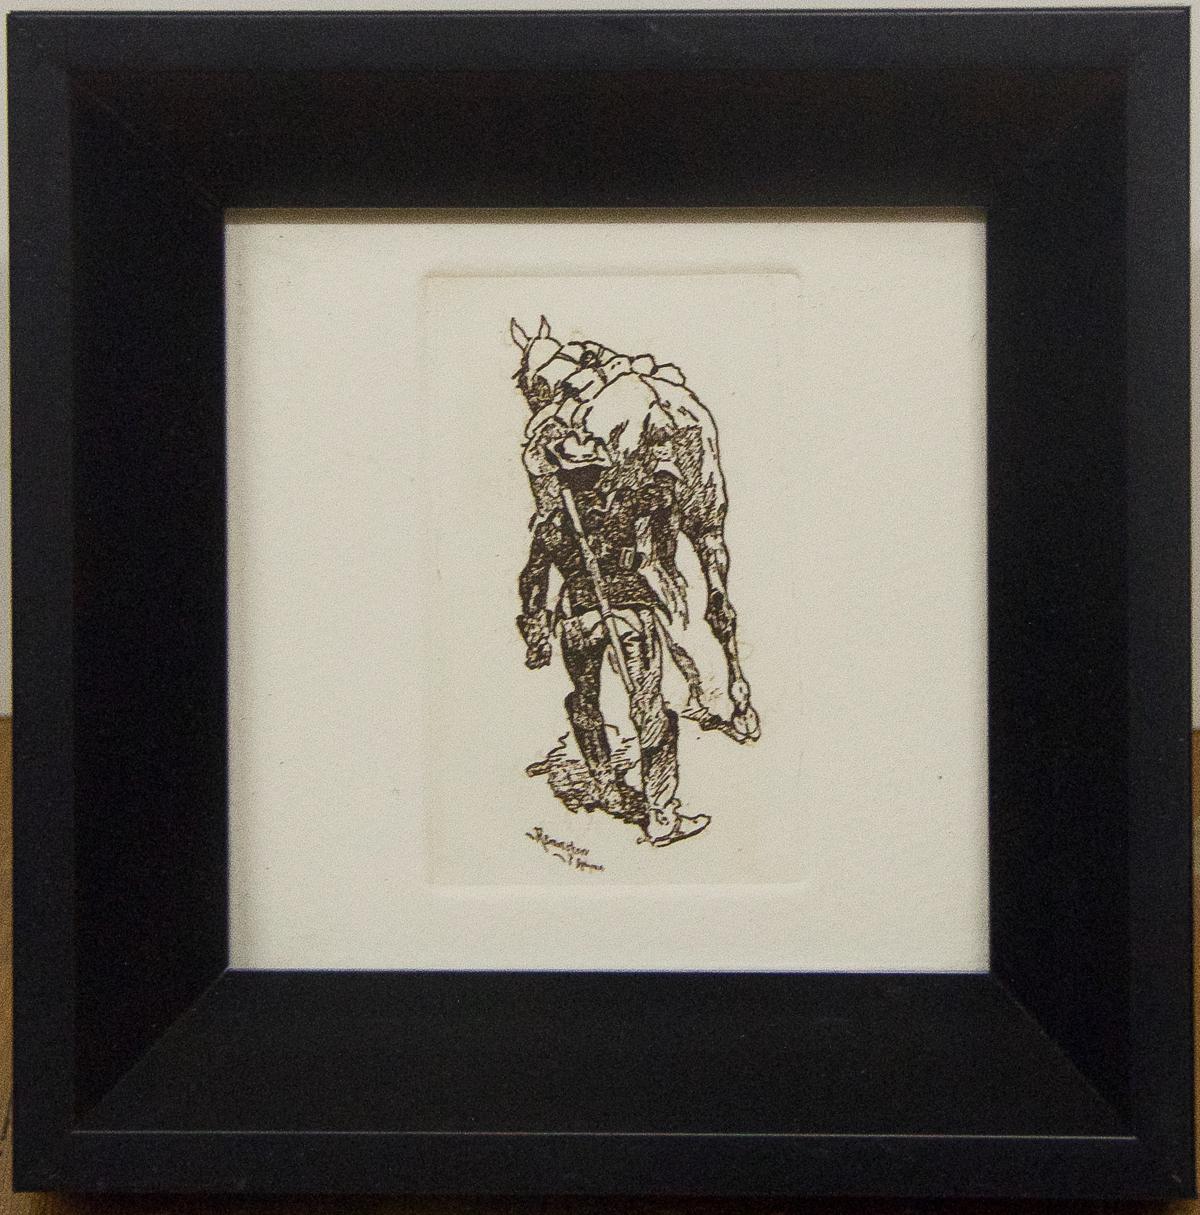 Four framed etchings by Frederic Remington 
All four frames measure 7 in x 7 in x 1.5 
Good condition